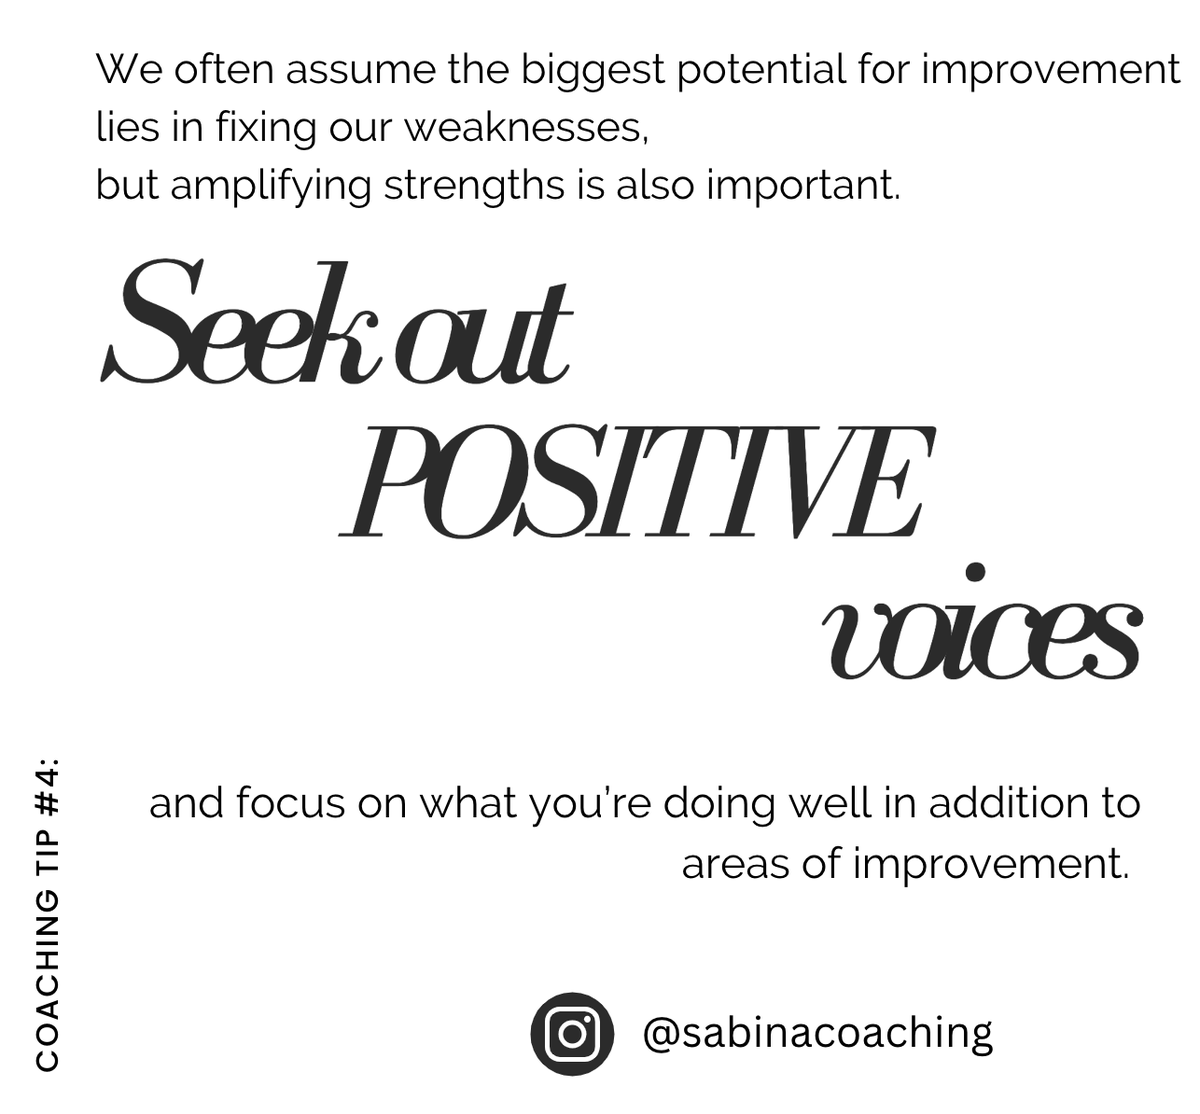 Unlock your potential: Gallup found using strengths daily boosts engagement 6x & strengths-focused teams are 12.5% more productive. Embrace compliments—ask questions, seek examples, replicate success, and understand where you shine #CoachingTips #WednesdayWisdom #ExecutiveSkills